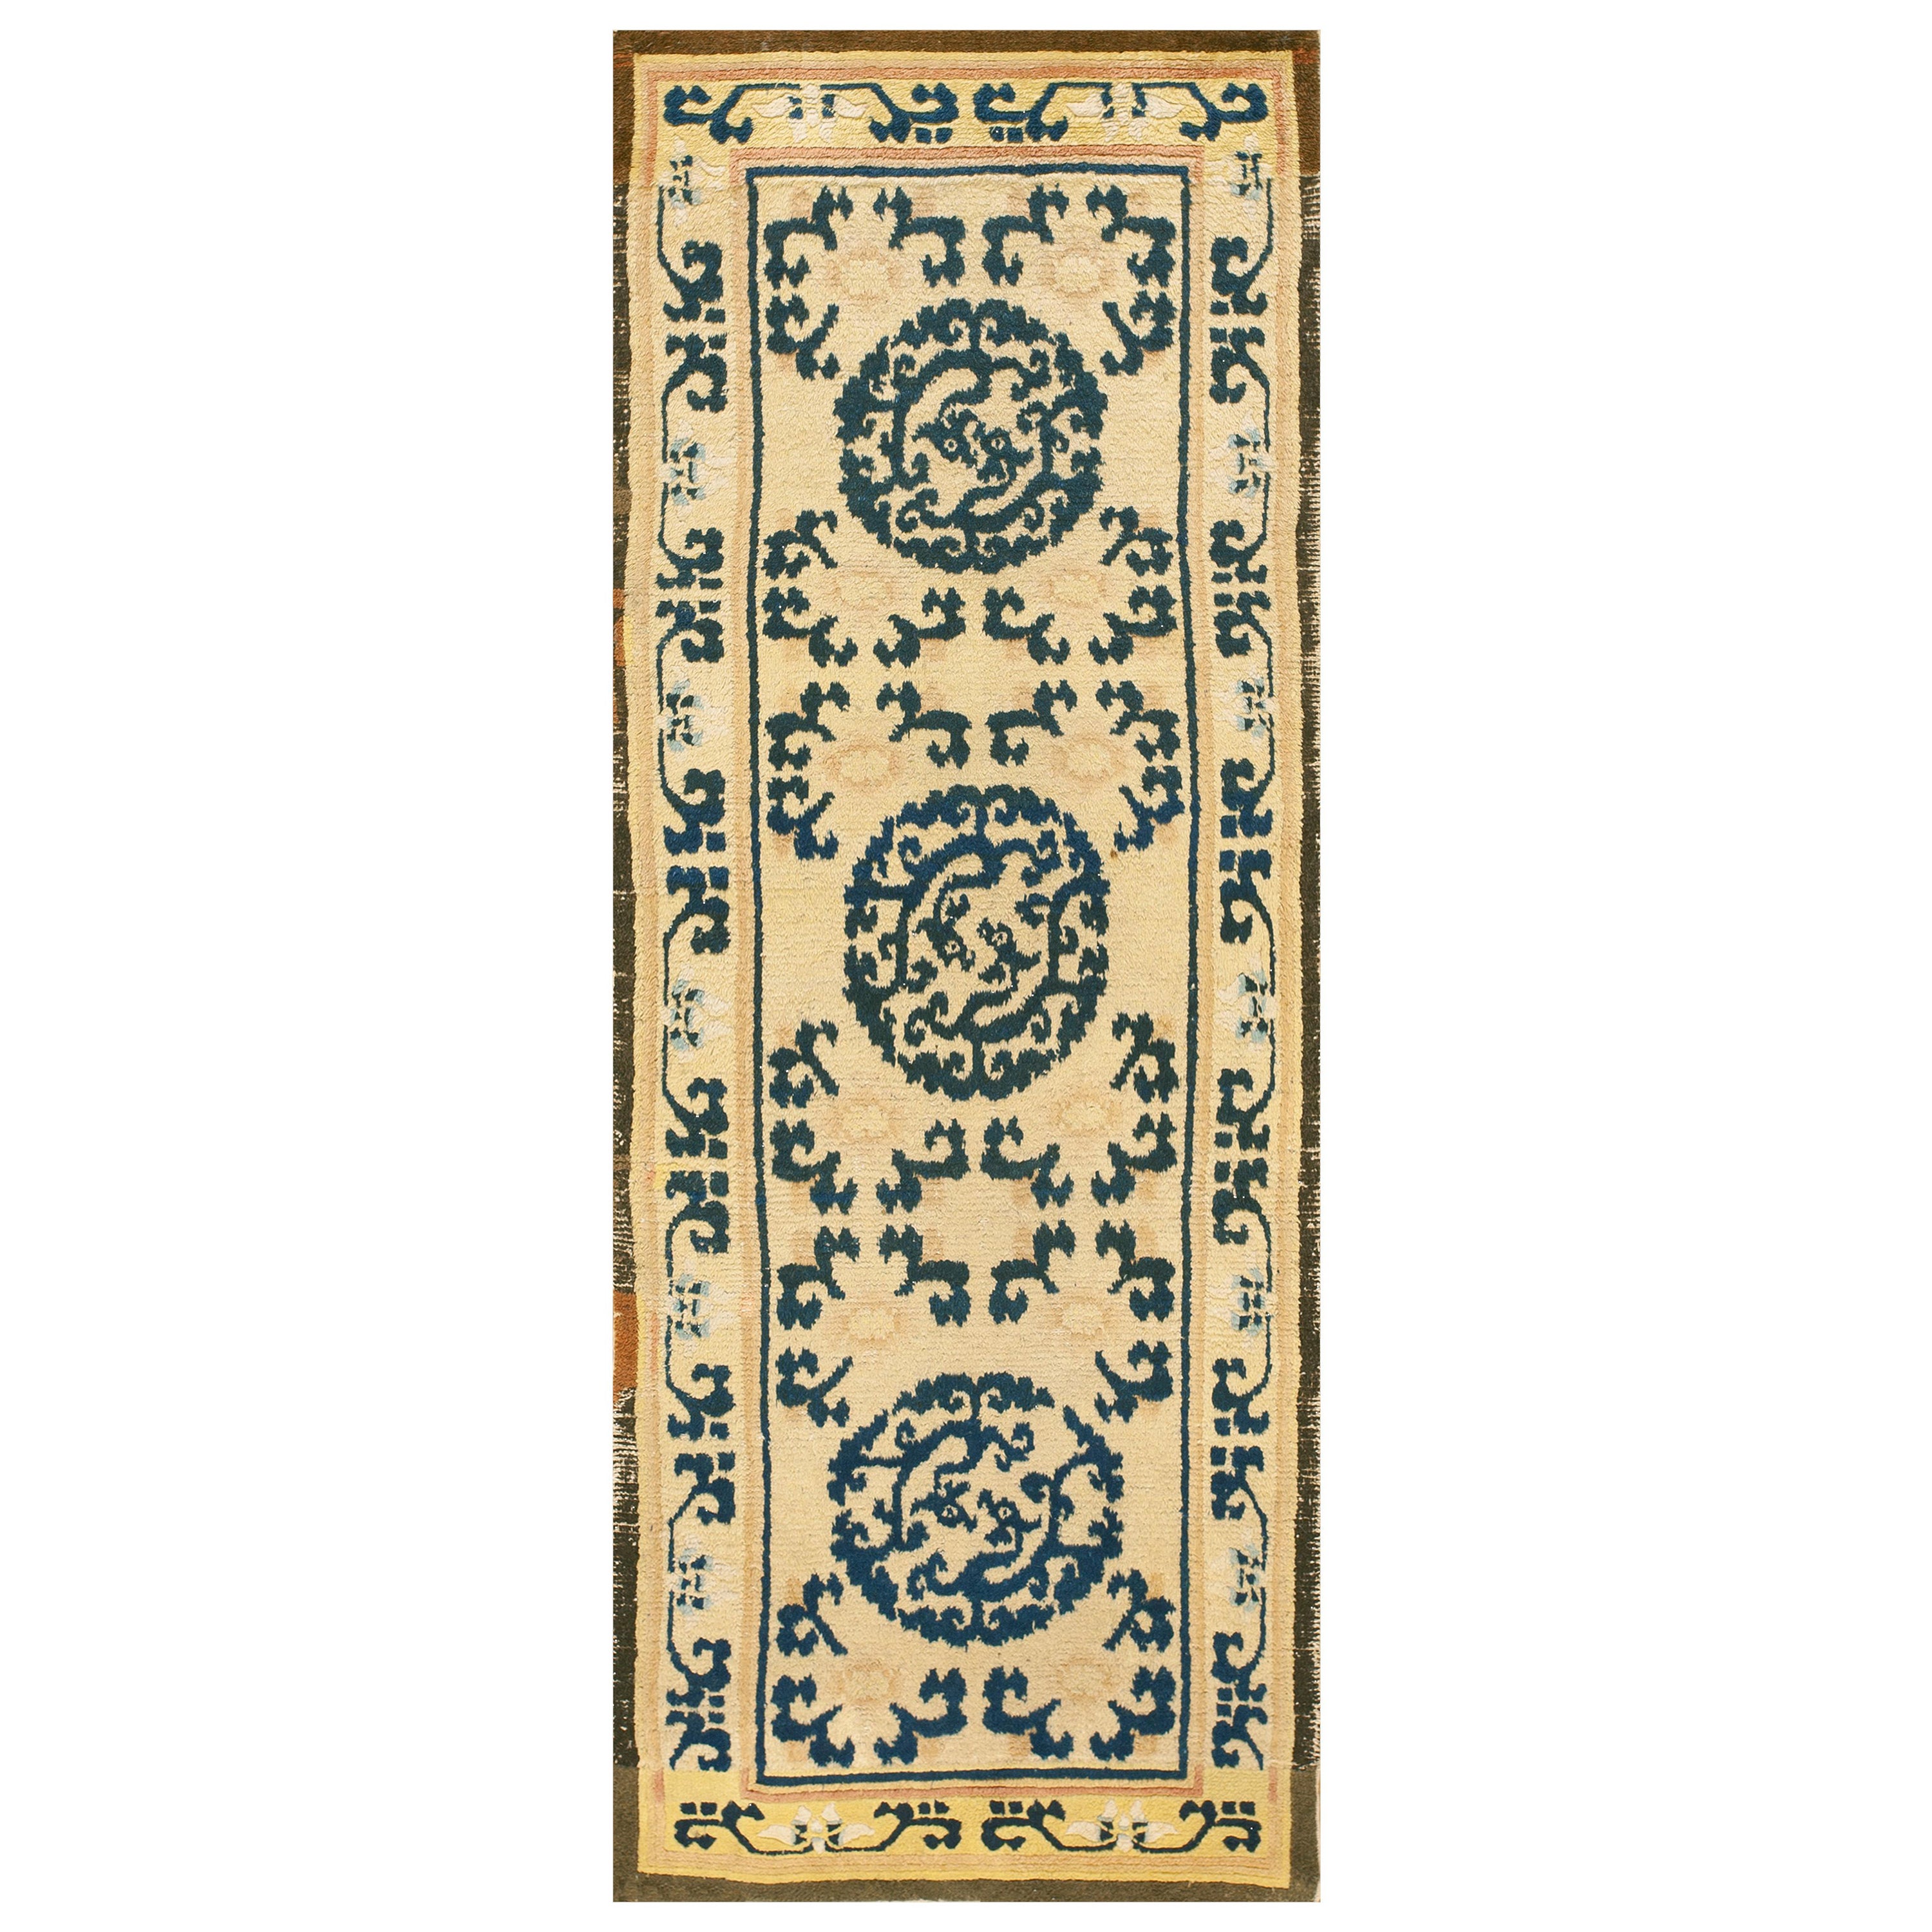 18th Century Chinese Ningxia Carpet ( 2'9" x 7' - 85 x 215 cm ) For Sale